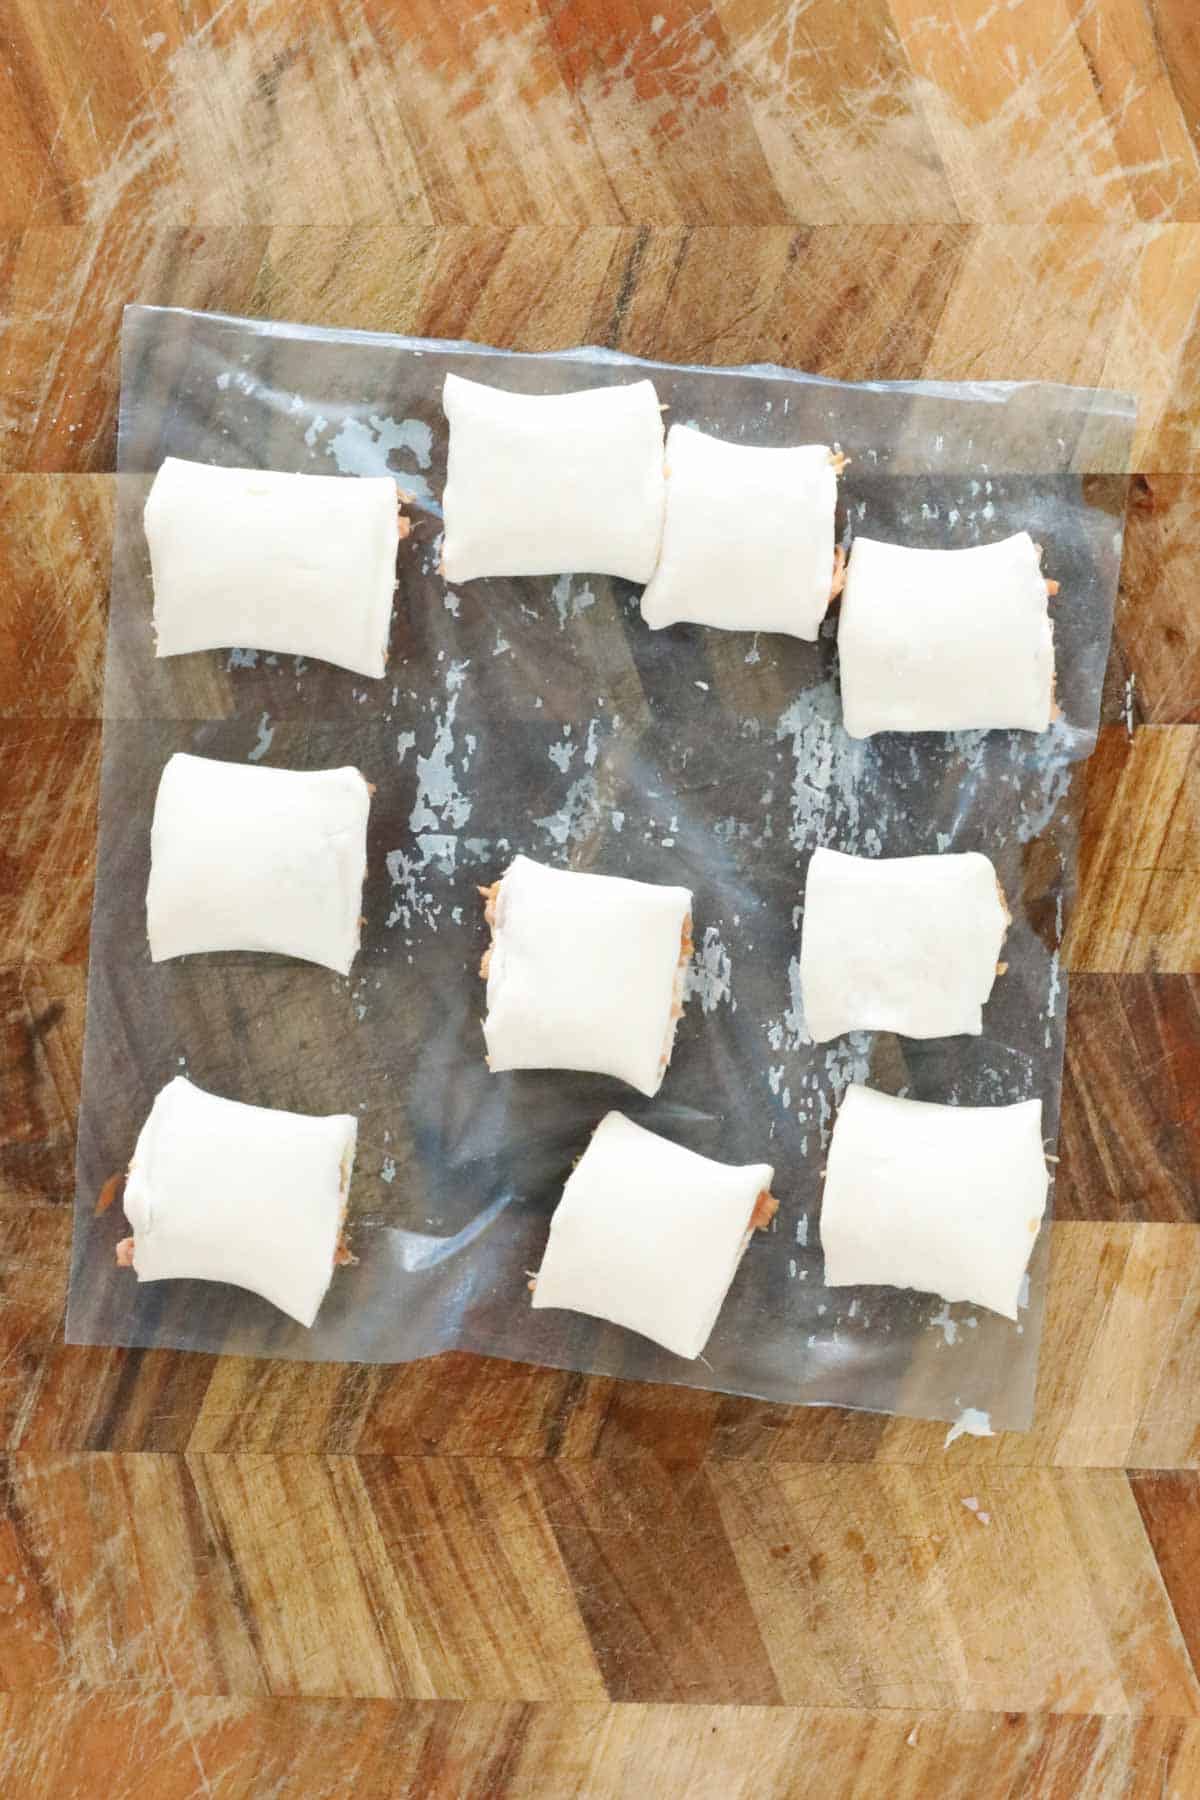 Small meat pastries cut into squares.